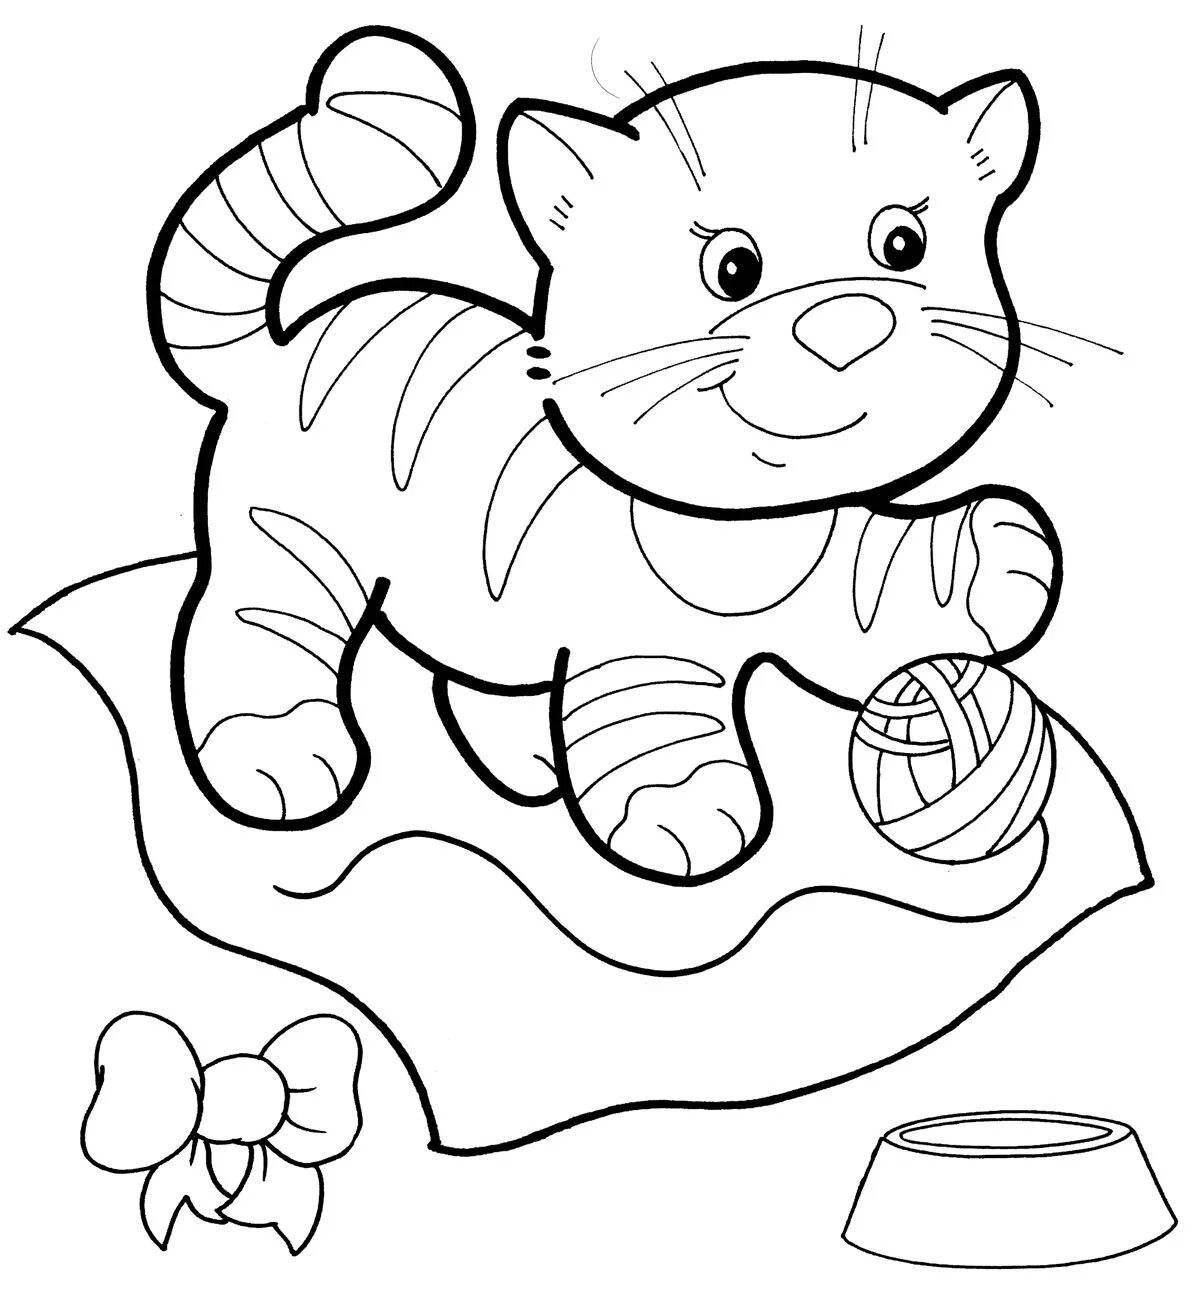 Live cat with a ball coloring book